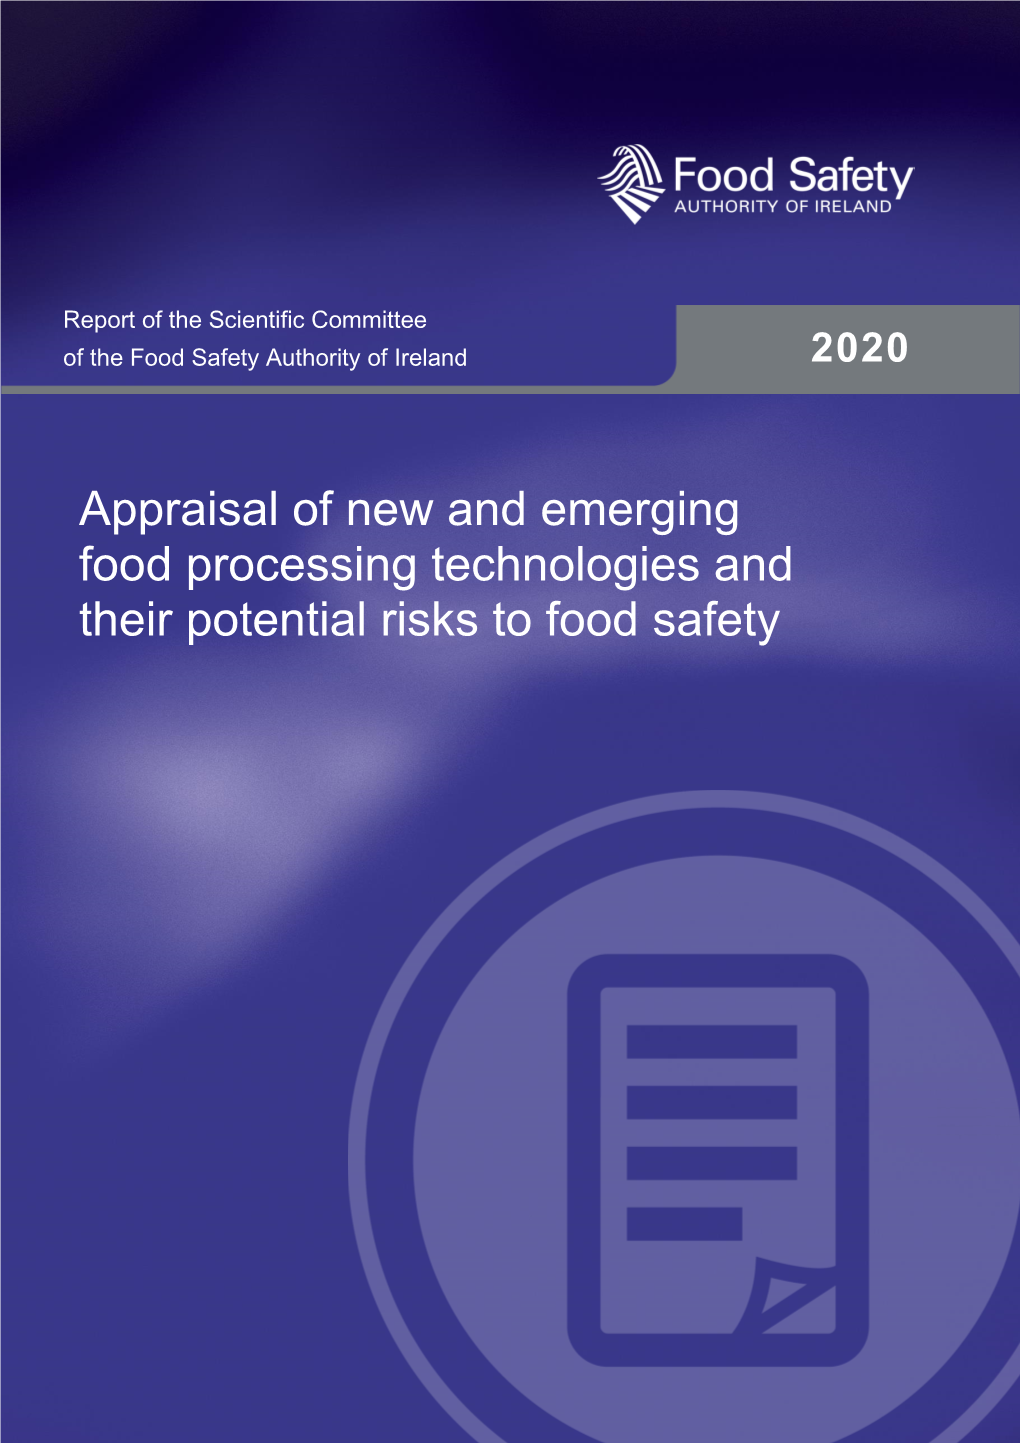 Appraisal of New and Emerging Food Processing Technologies and Their Potential Risks to Food Safety